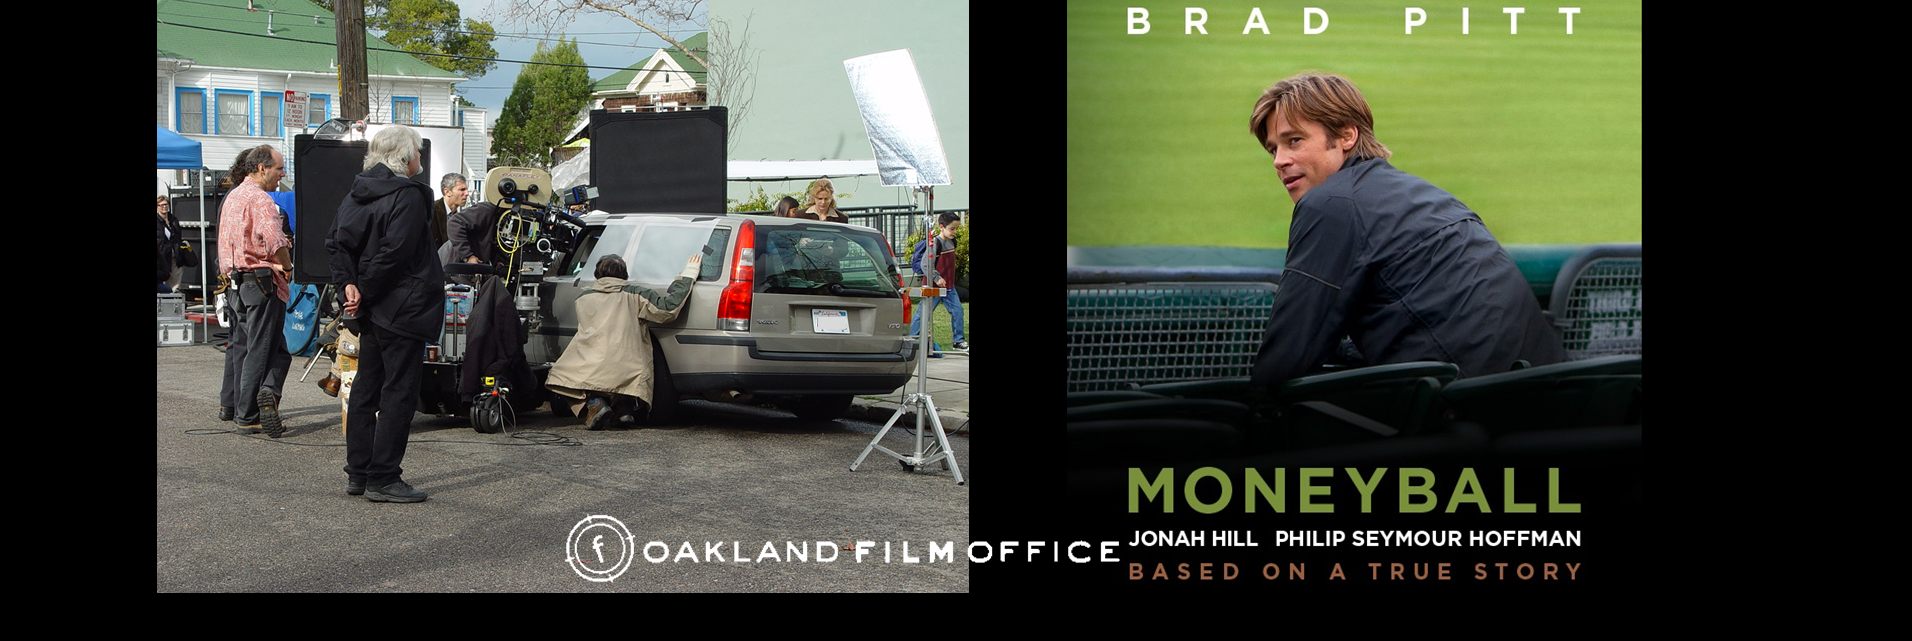 Photo from an Oakland City street film shoot and Moneyball poster Oakland Film Office website page header collage